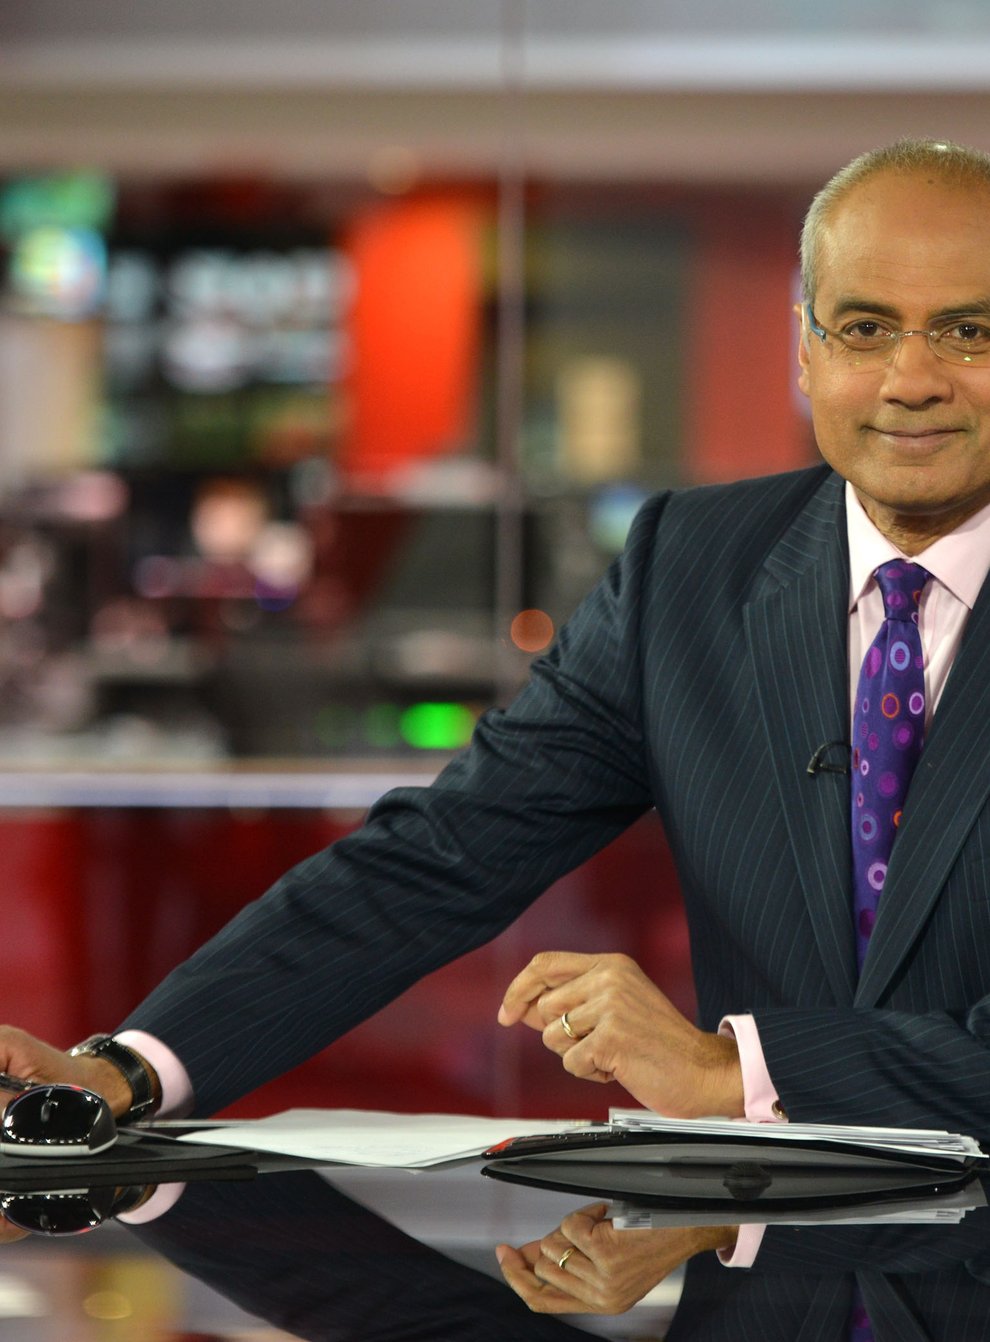 George Alagiah is returning to presenting duties (Jeff Overs/BBC/PA)